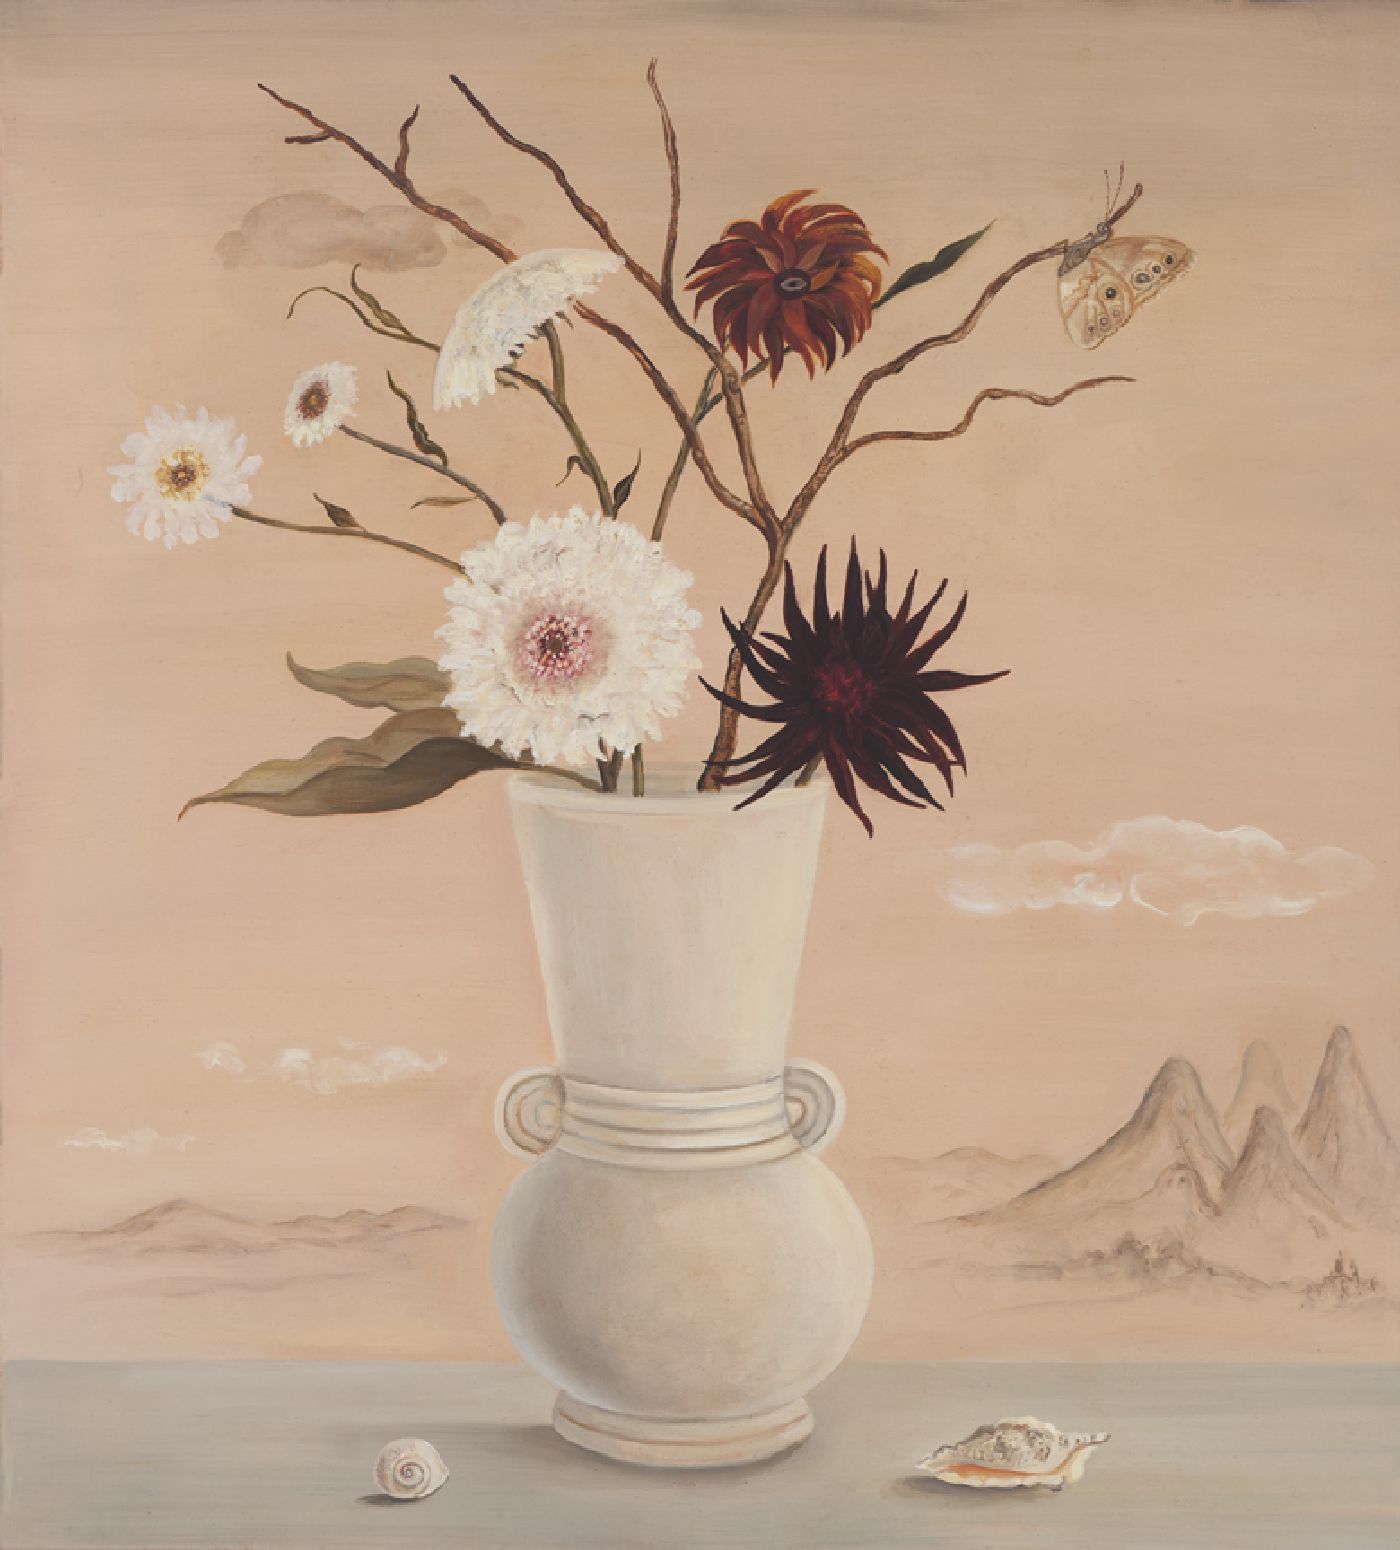 Still Life with Barren Landscape - oil on linen, 32 x 39 inches, 2013-2014